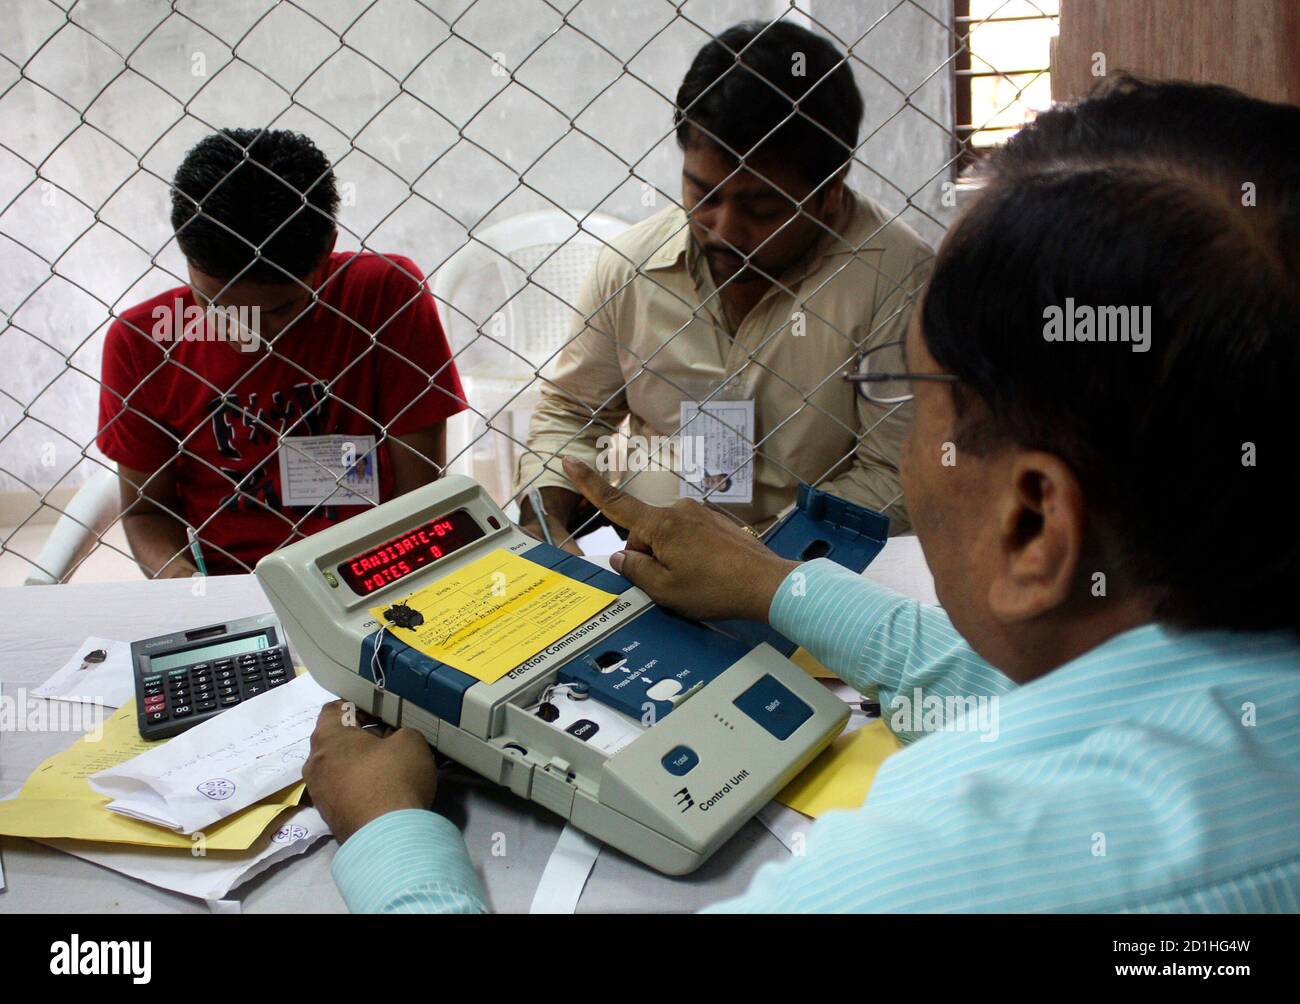 An Election Official R Prepares To Count Ballots Inside A Counting Centre In Gandhinagar 25 Km 16 Miles North Of The Western Indian City Of Ahmedabad May 16 2009 Prime Minister Manmohan